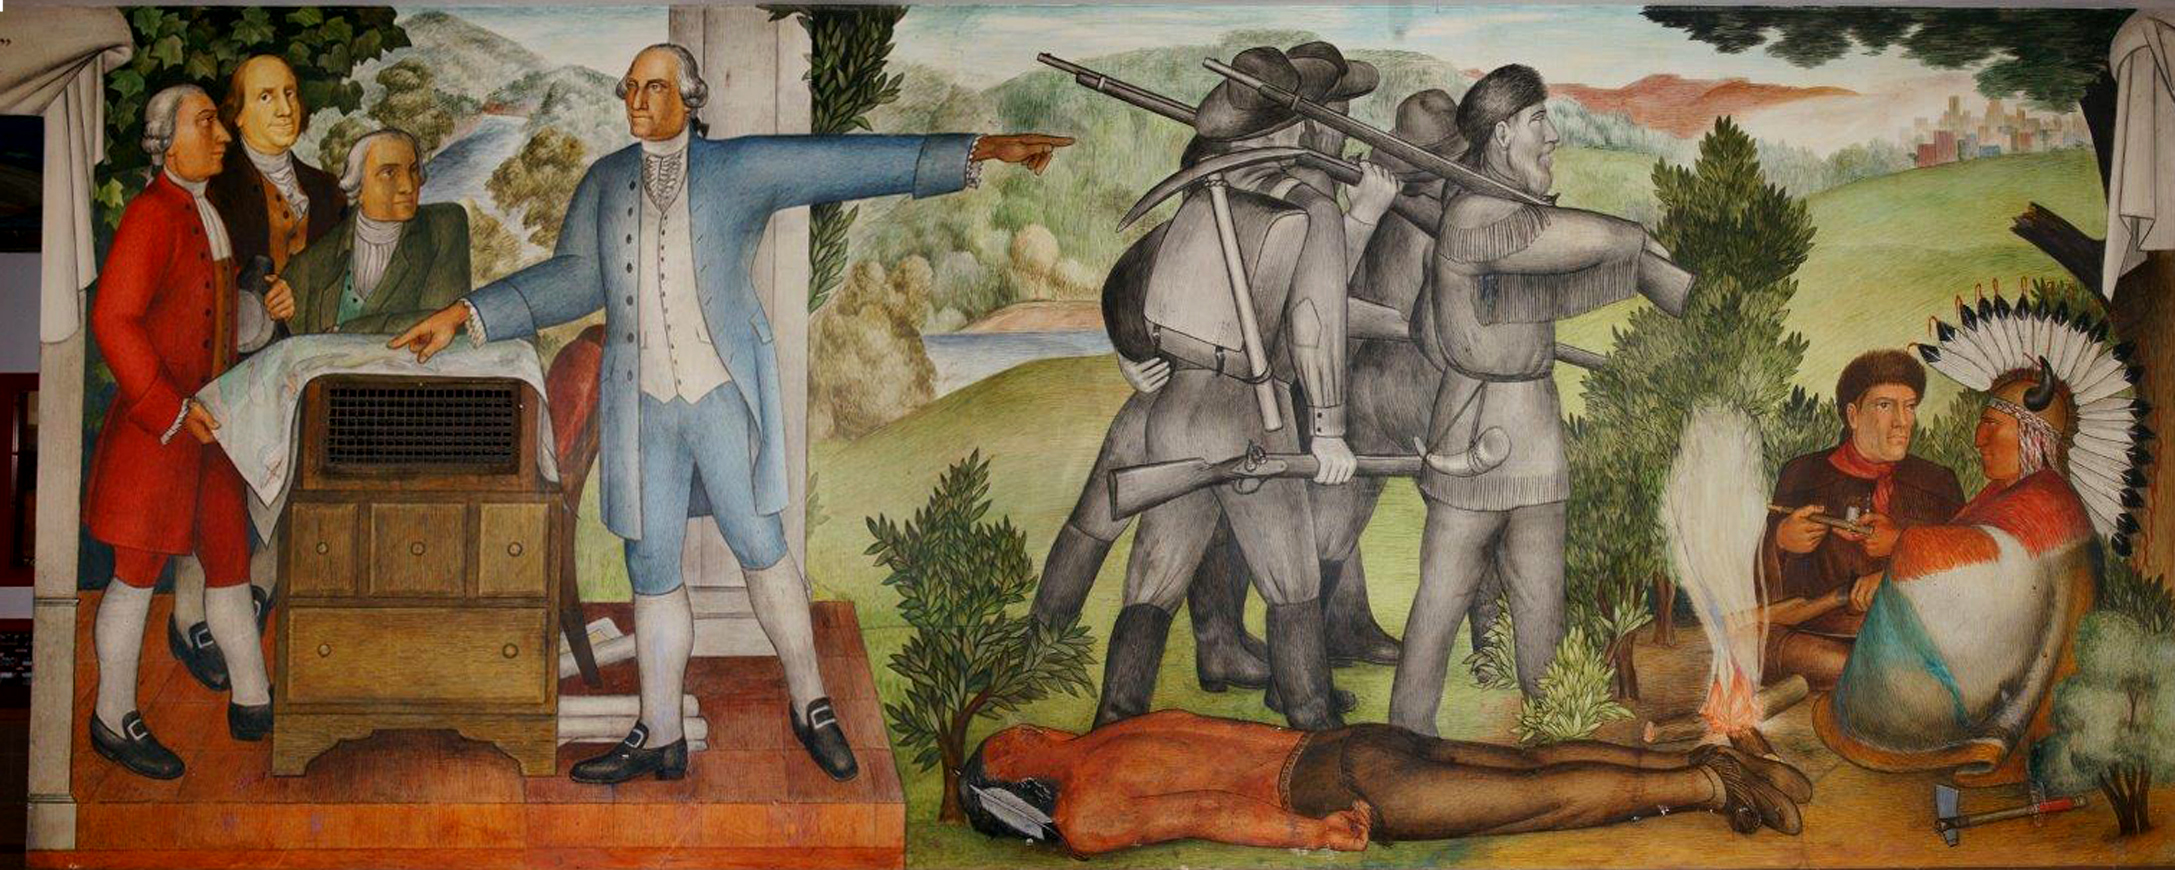 A painting of George Washington depicting gray-toned figures of soldiers who are marching into the wilderness with guns over their shoulder, stepping over the body of a dead Native American man.